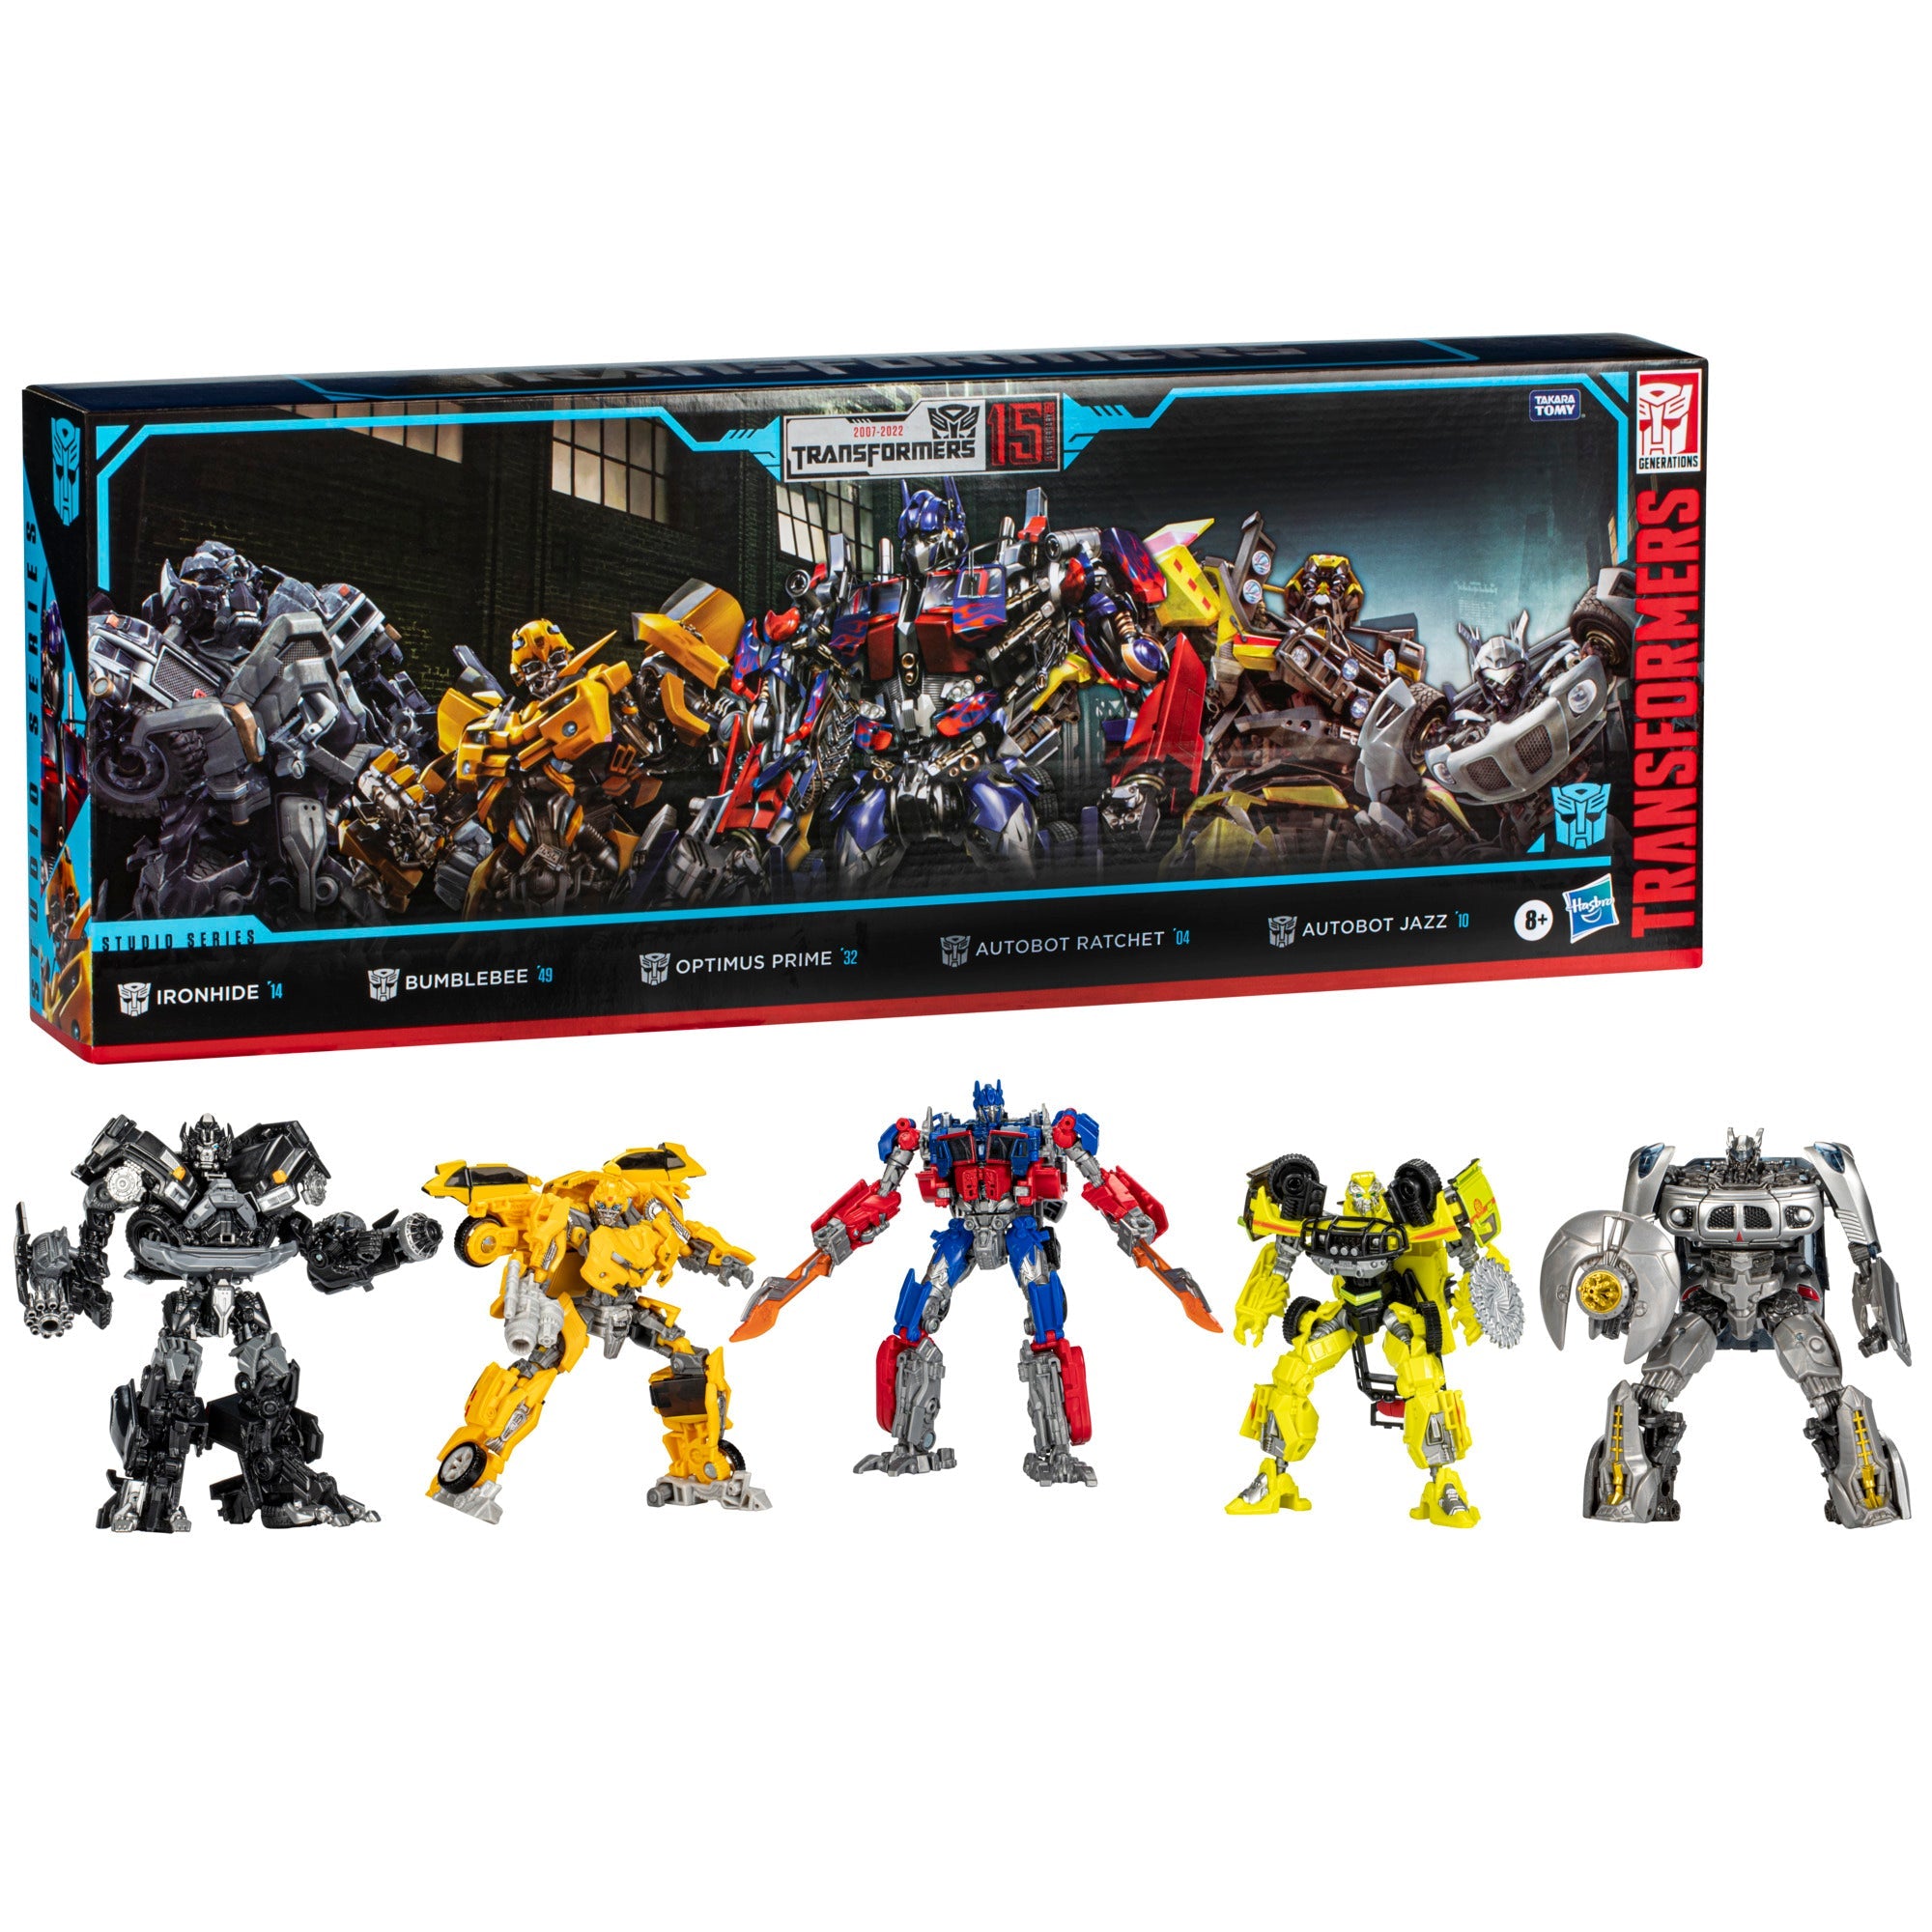 Transformers Ultimate Bumblebee Hasbro Robot Large 14 inches Chevy